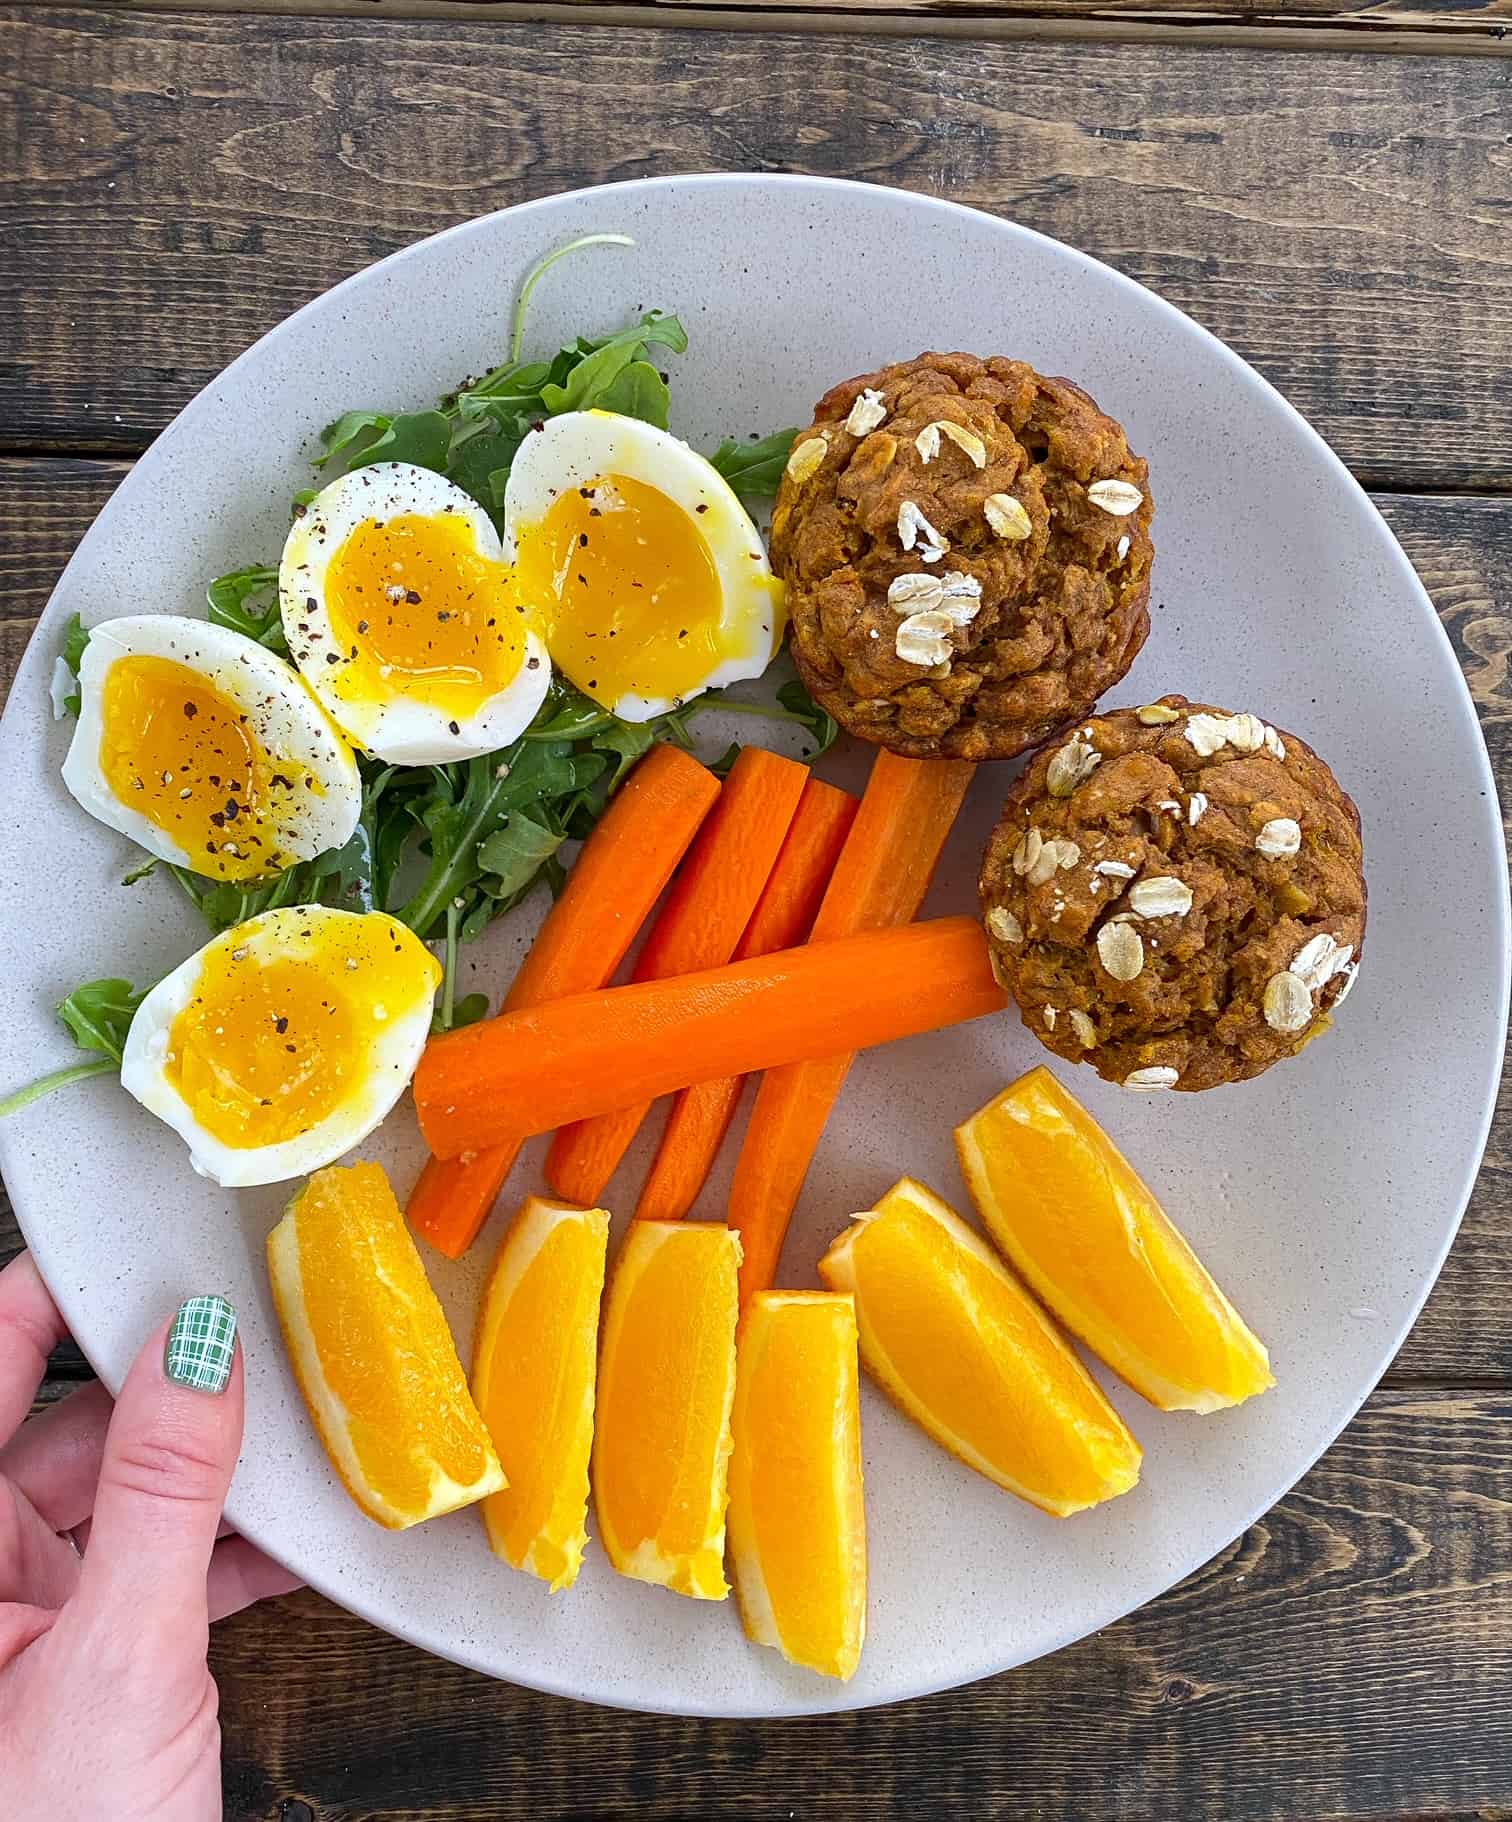 https://dieteticdirections.com/wp-content/uploads/2023/03/Easy-Balanced-Lunch-Plate-.jpg